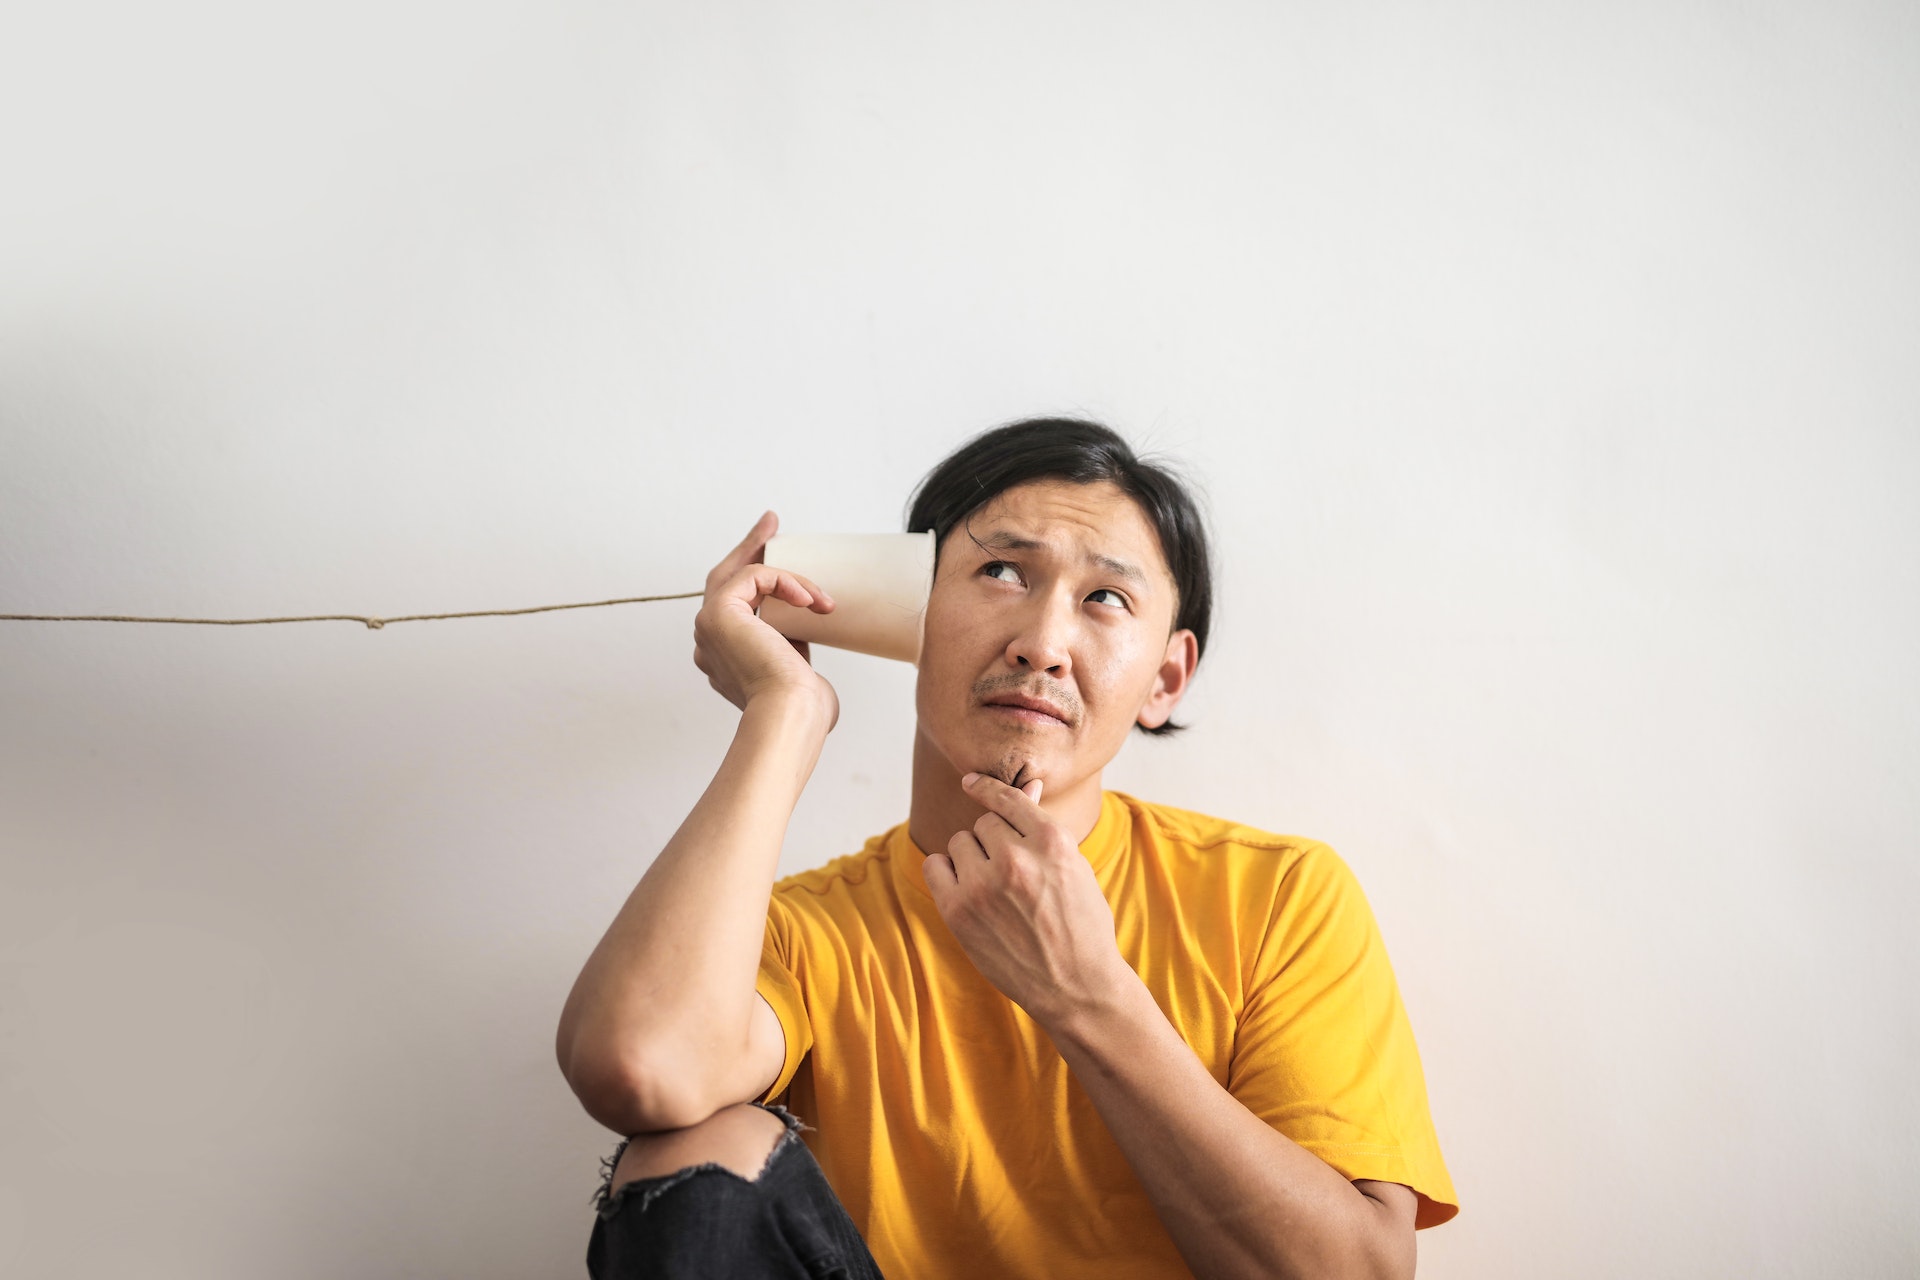 A man holds a cup to his ear attached to a string, to suggest poor communication.